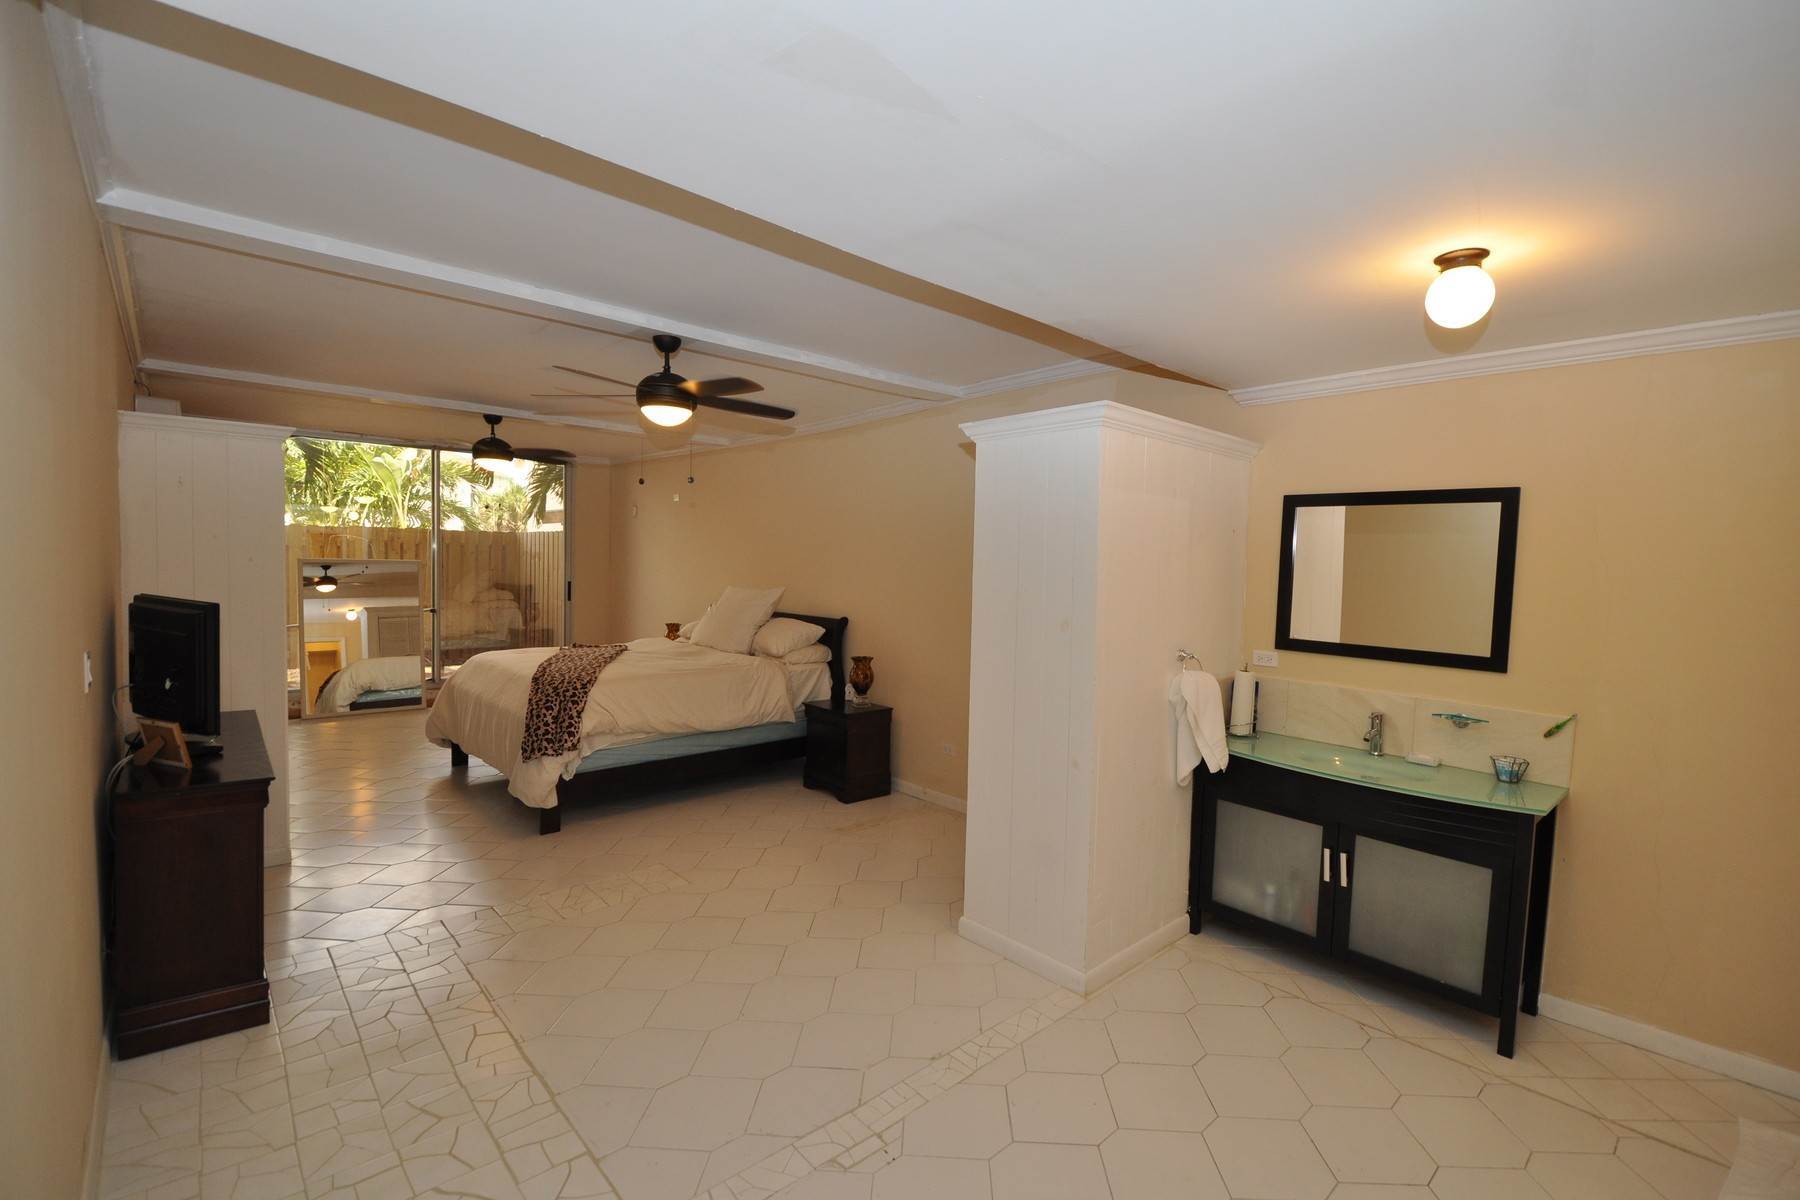 8. Condominiums for Sale at Rawson Court G04 Other Bahamas, Other Areas In The Bahamas, Bahamas